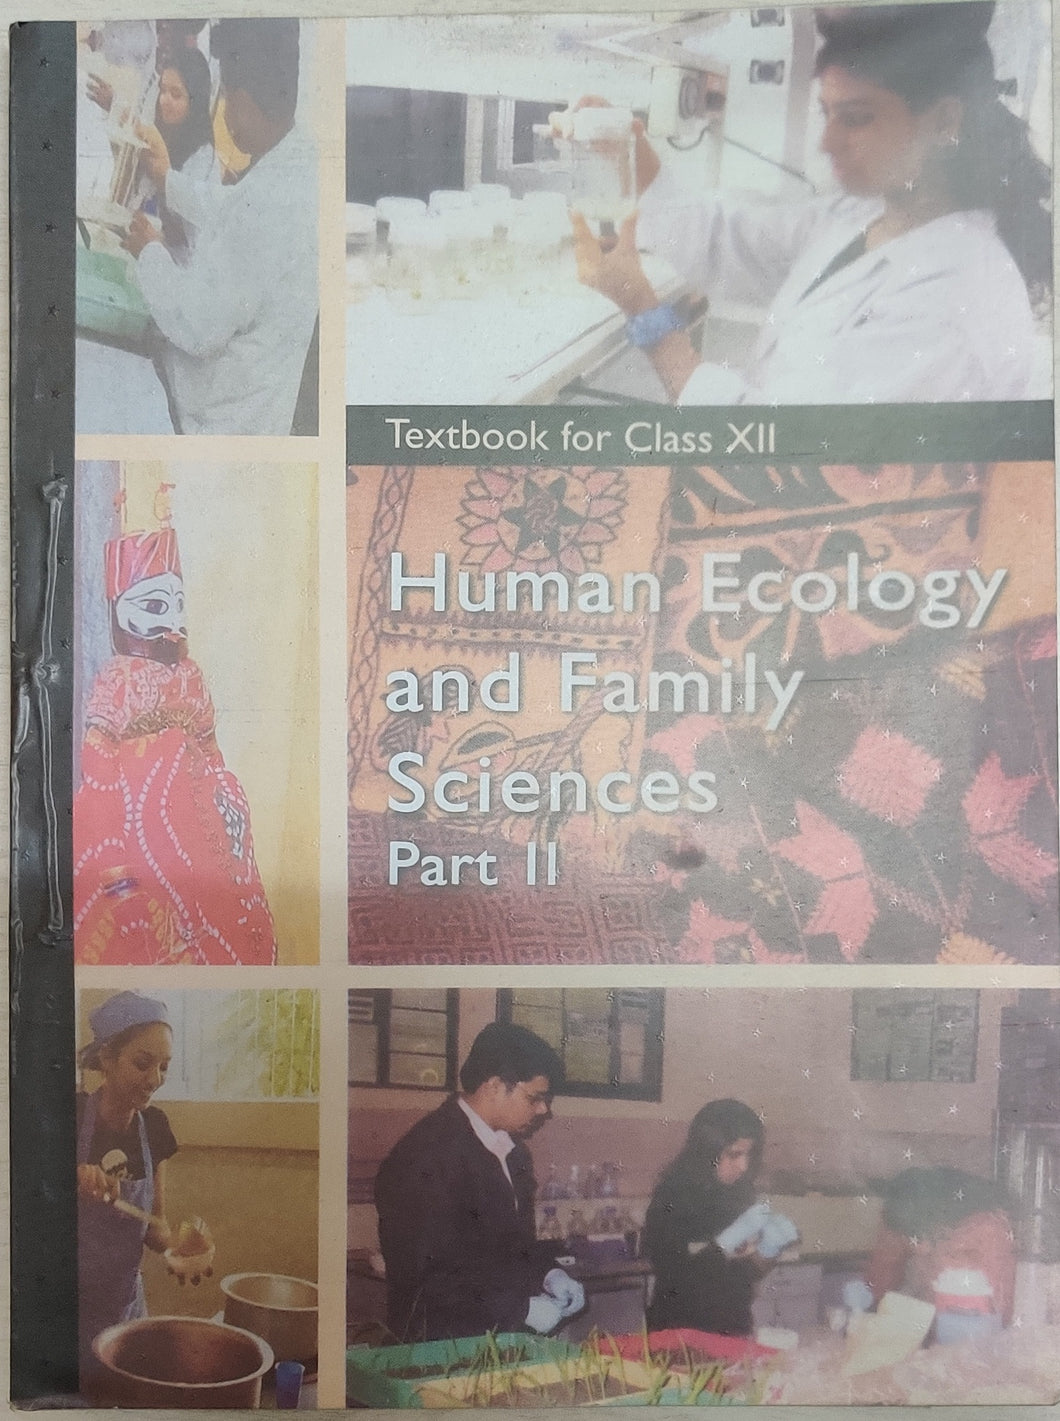 NCERT Human Ecology & Family Science Part II for Class 12 - latest edition as per NCERT/CBSE